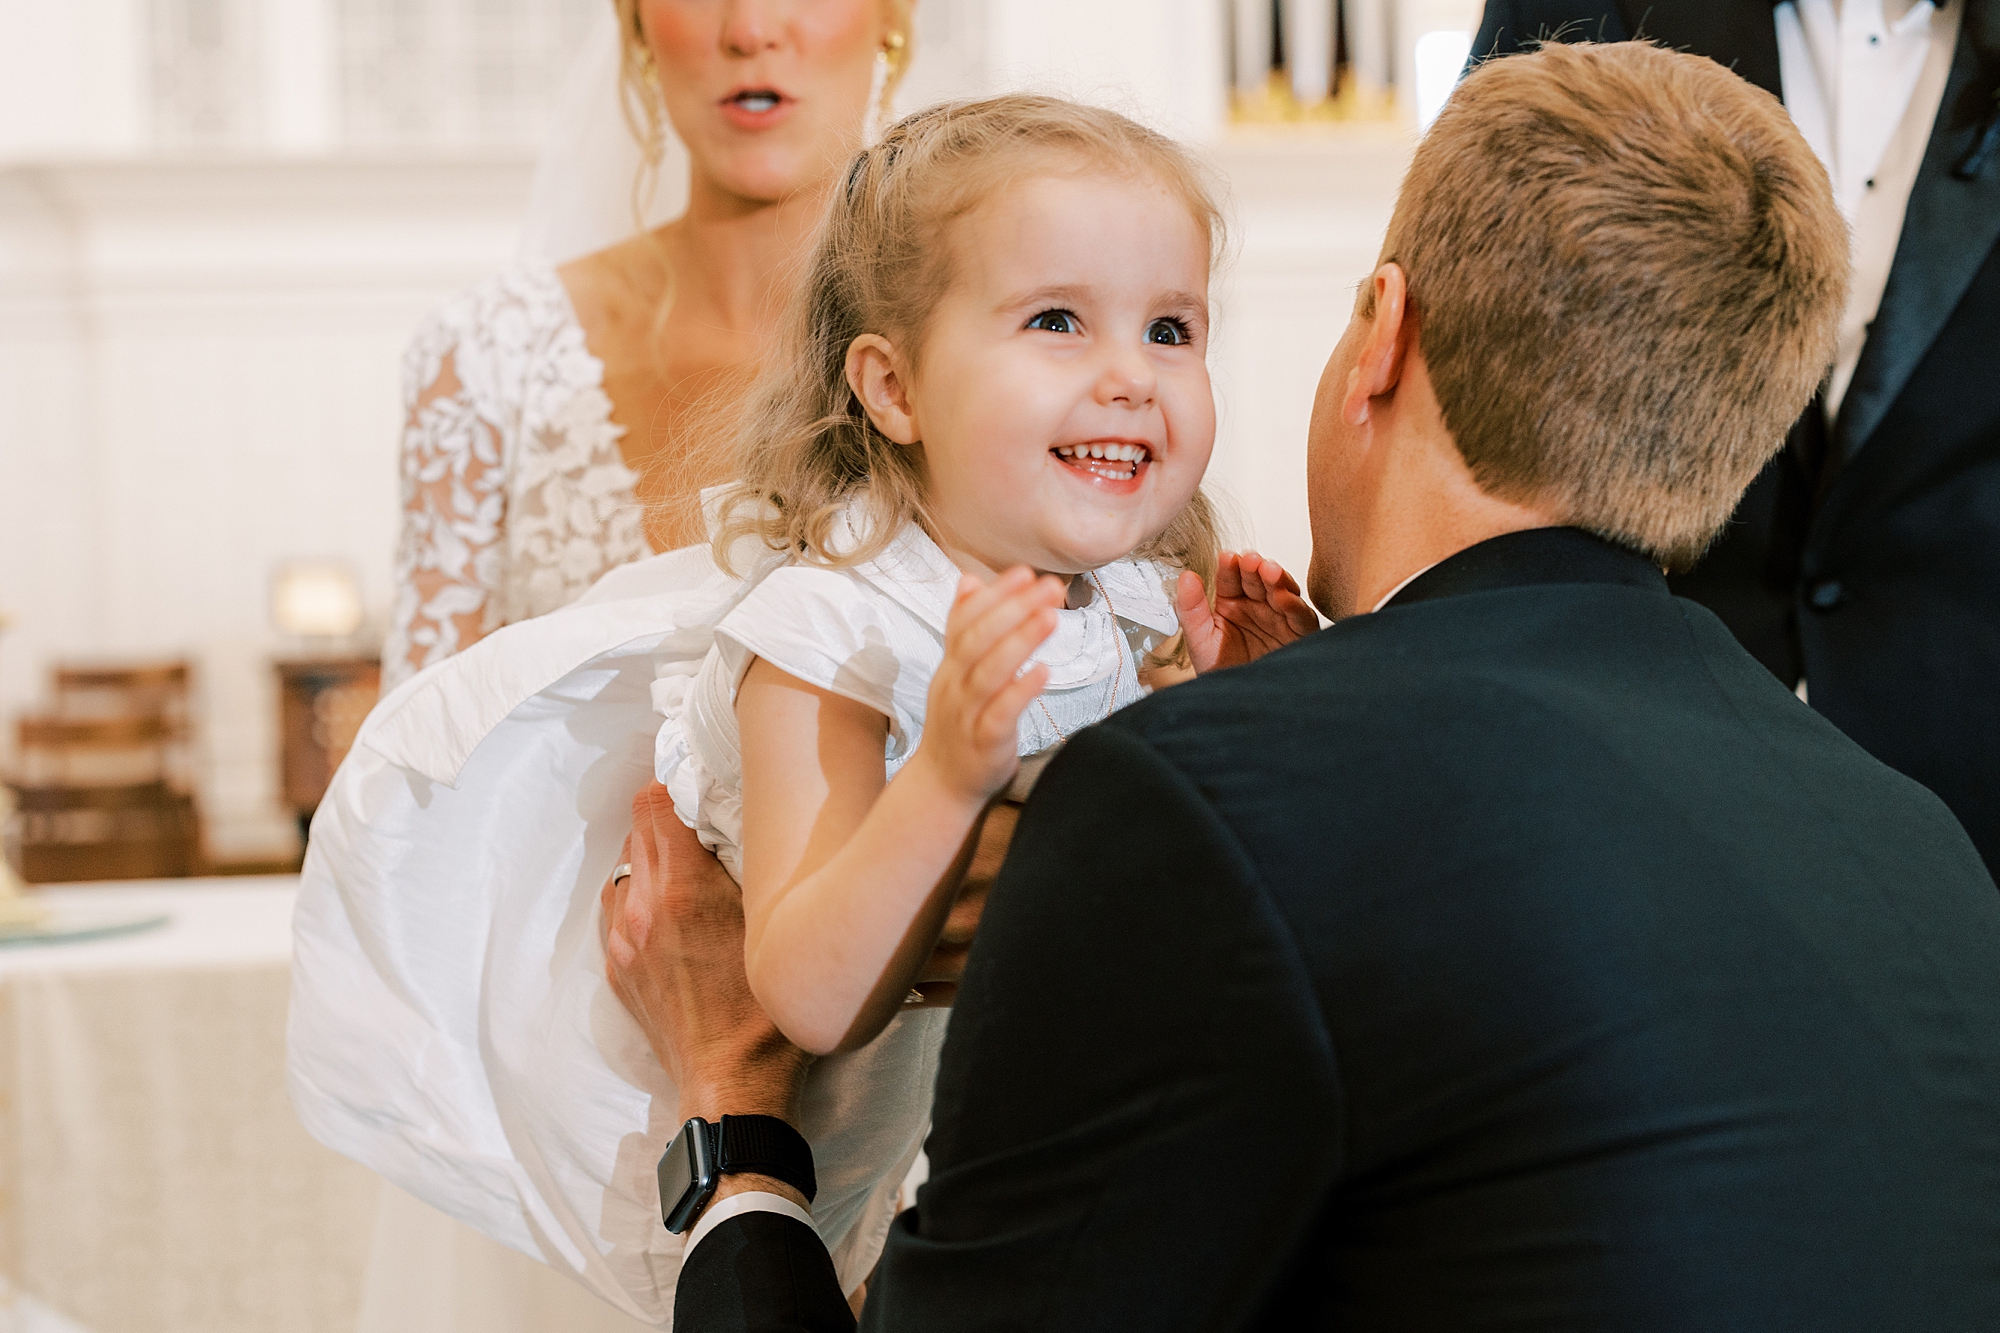 flower girl laughs with dad leaving bride's arms 